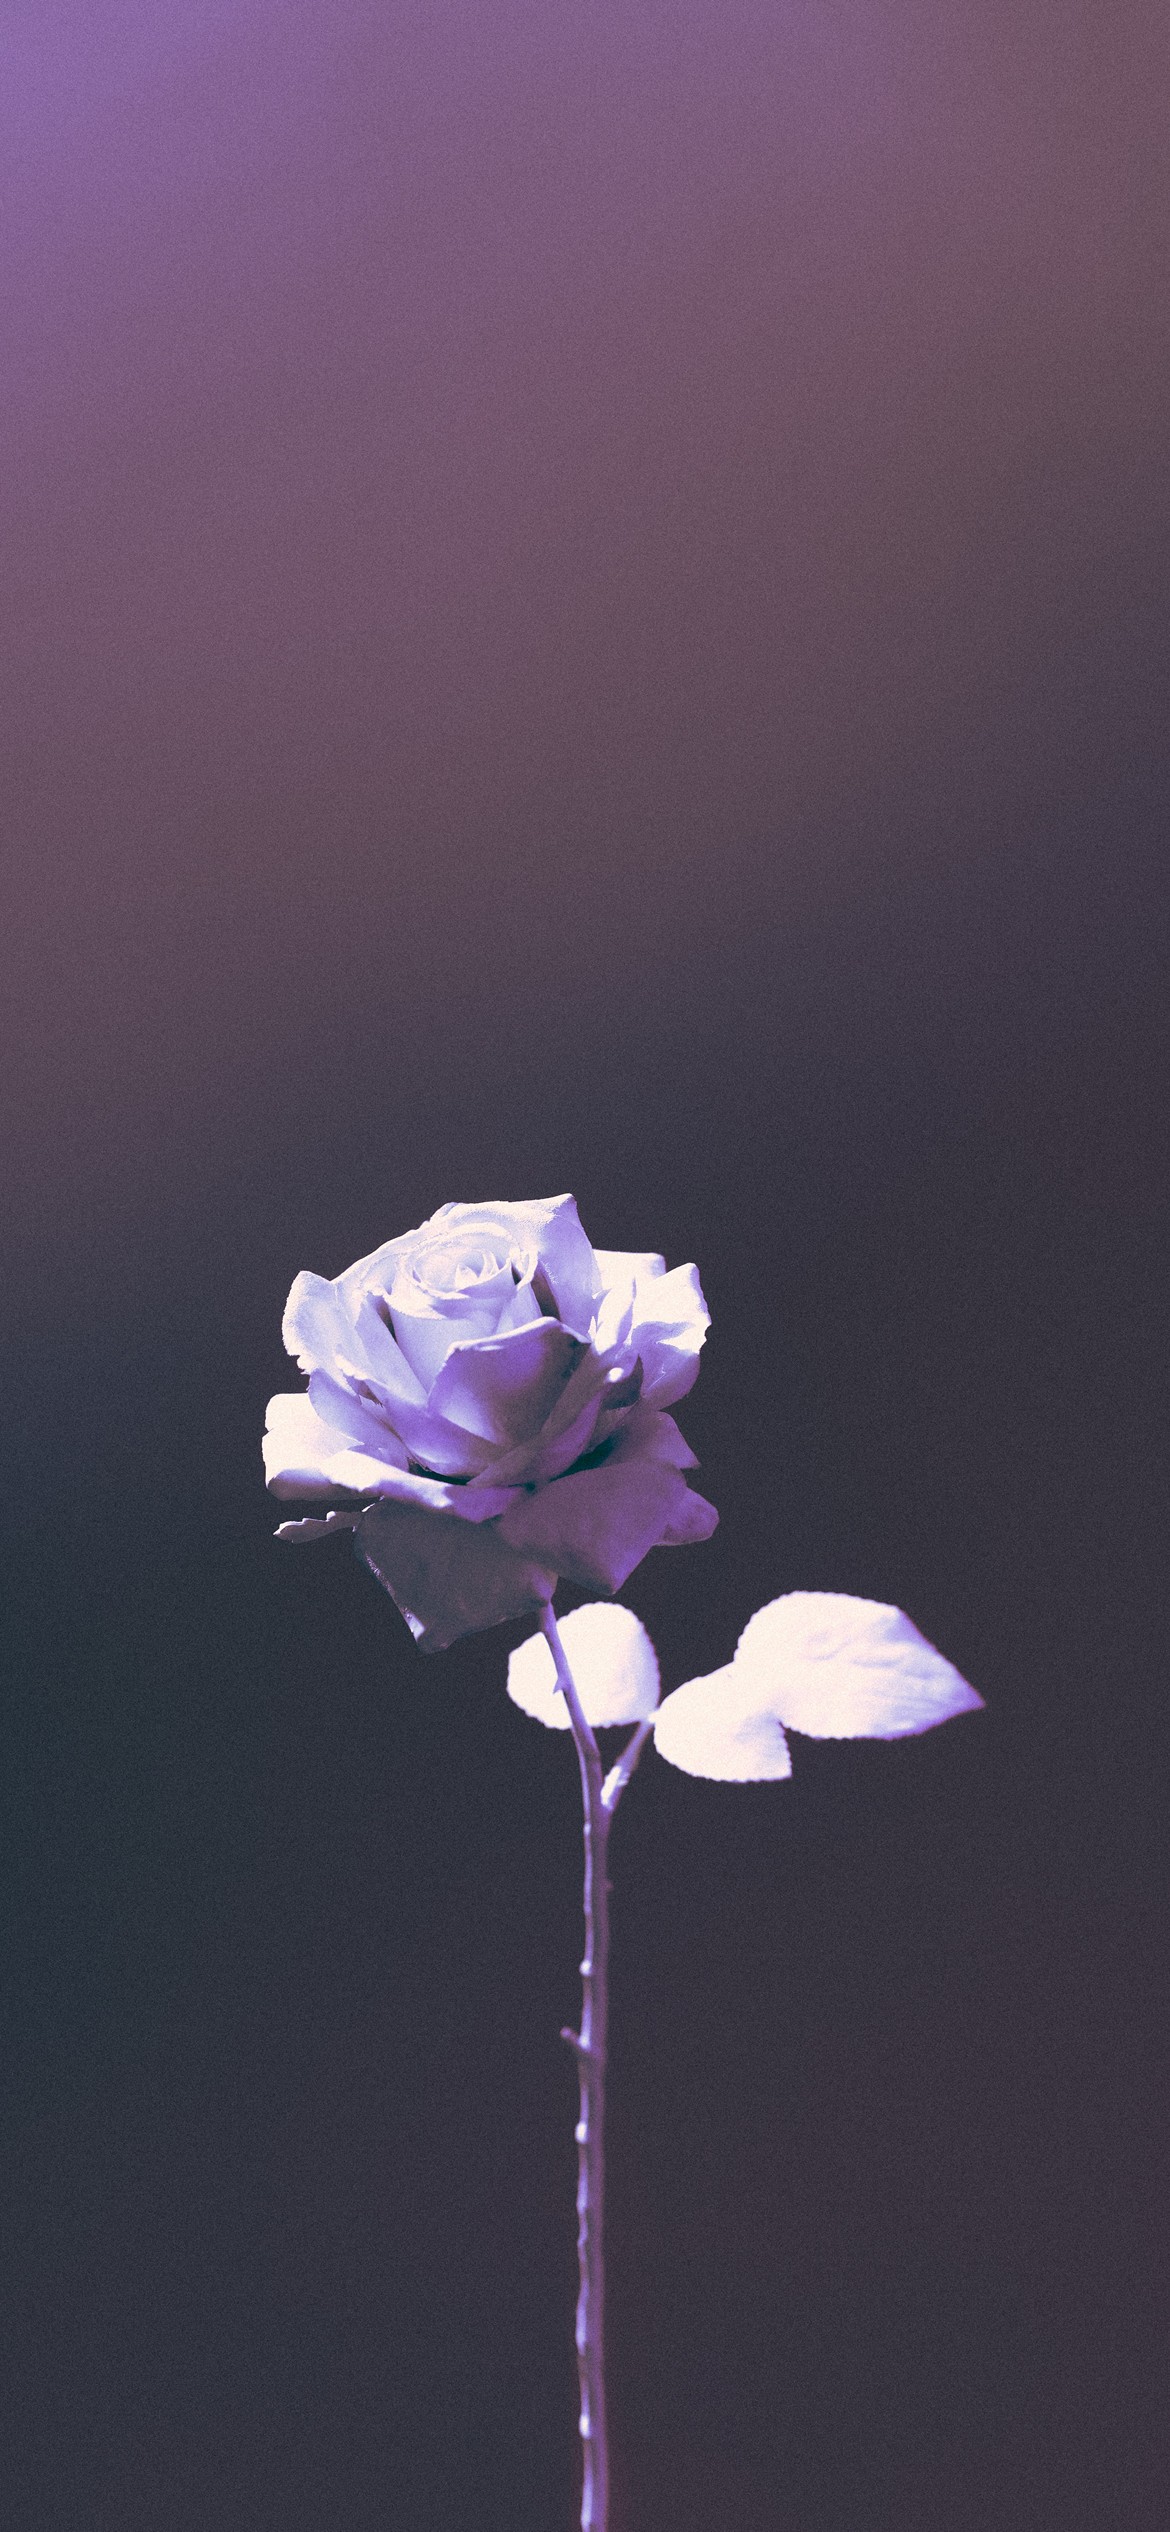 Rose Wallpapers | Best Wallpapers